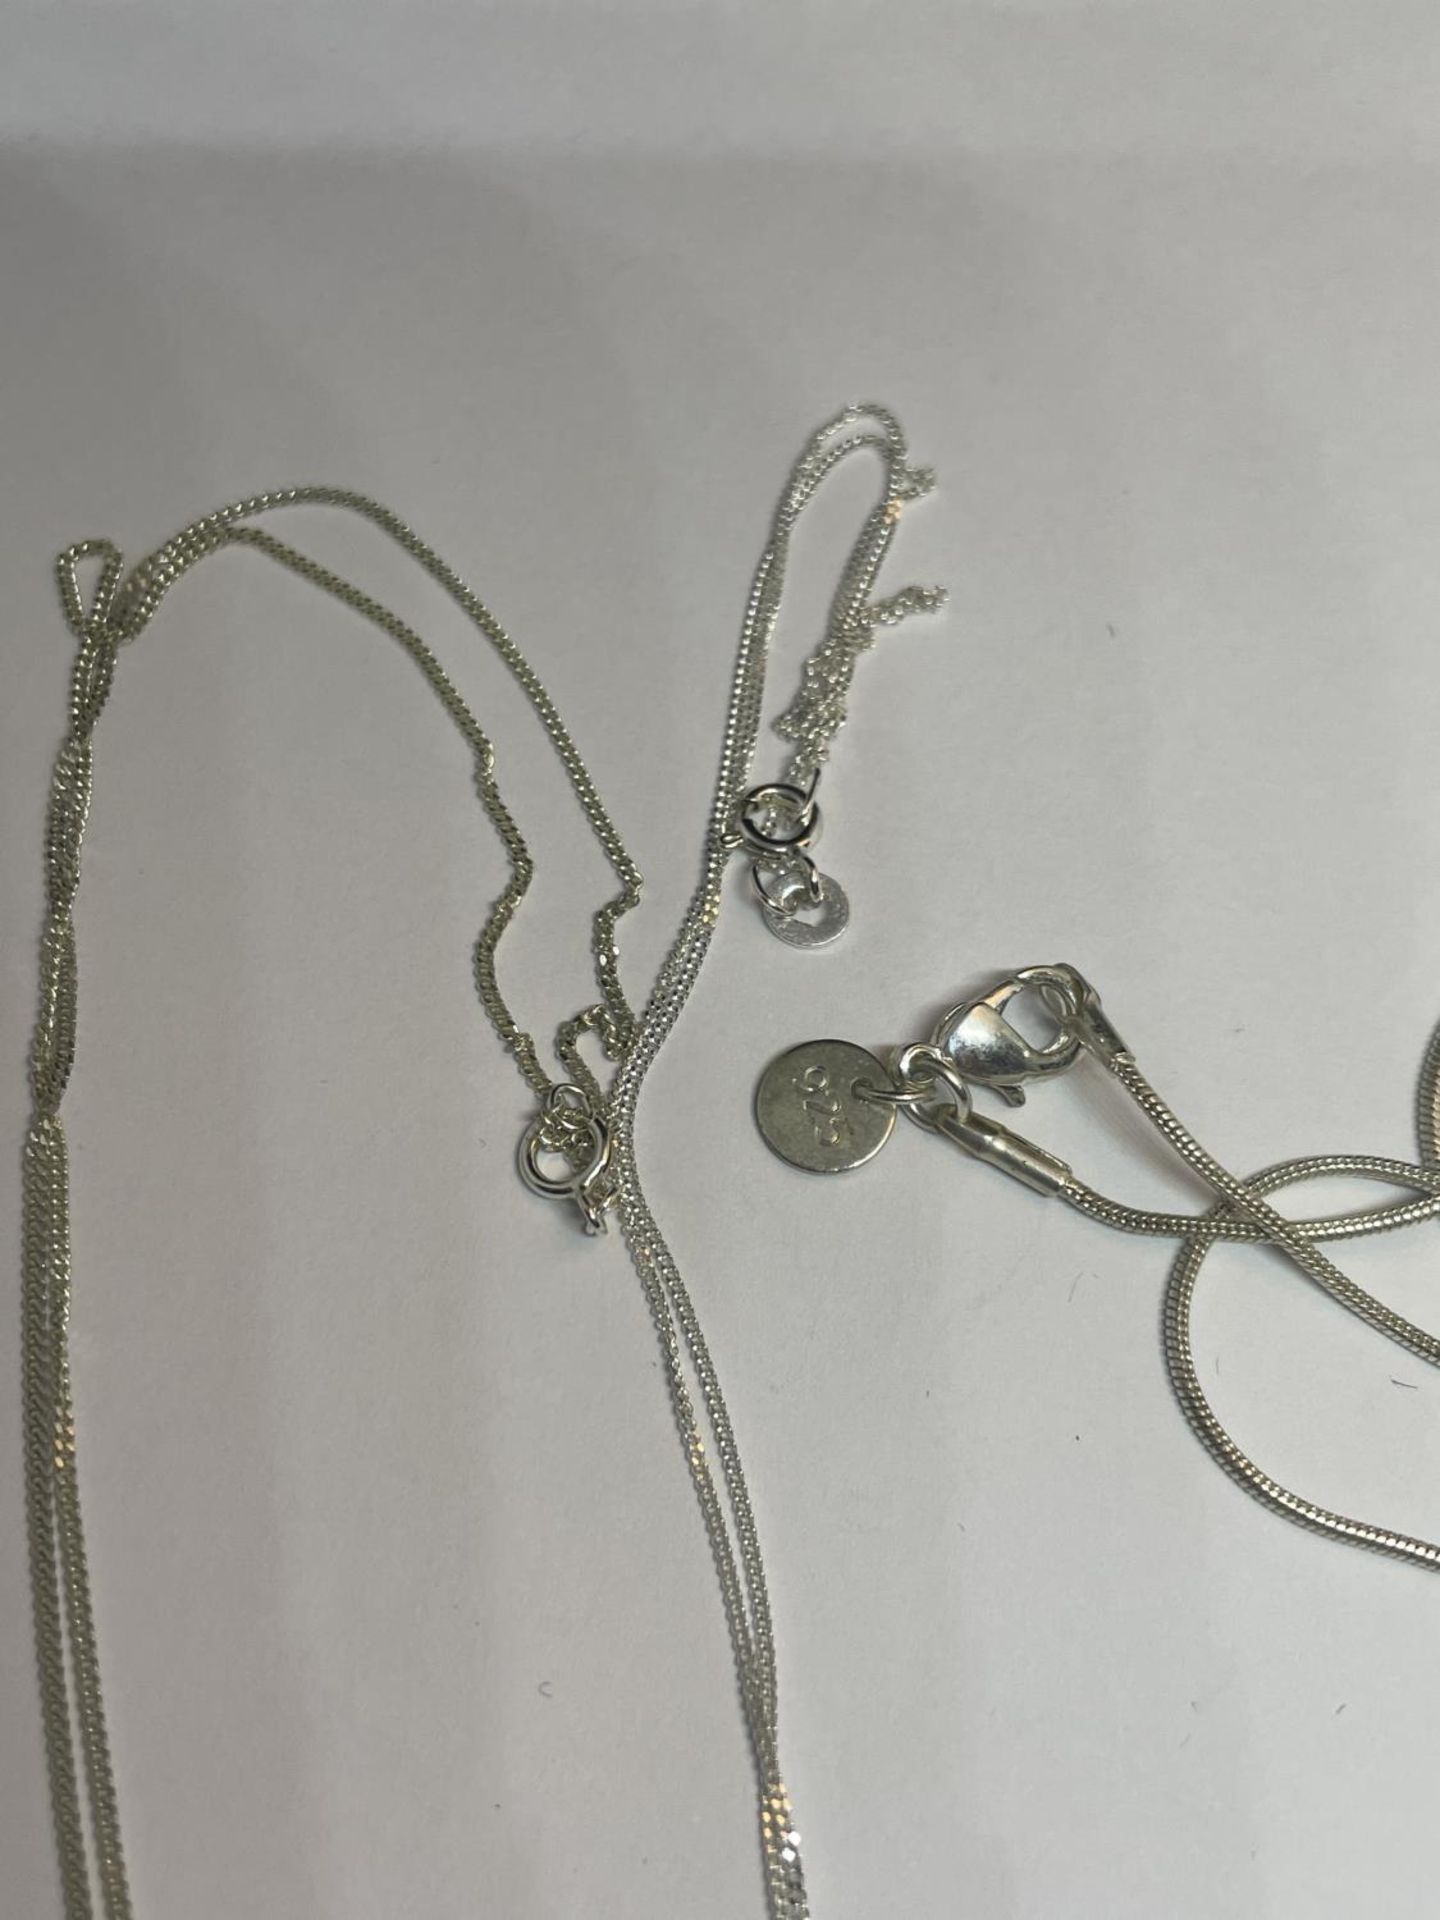 THREE SILVER NECKLACES WITH CROSS PENDANTS - Image 3 of 3